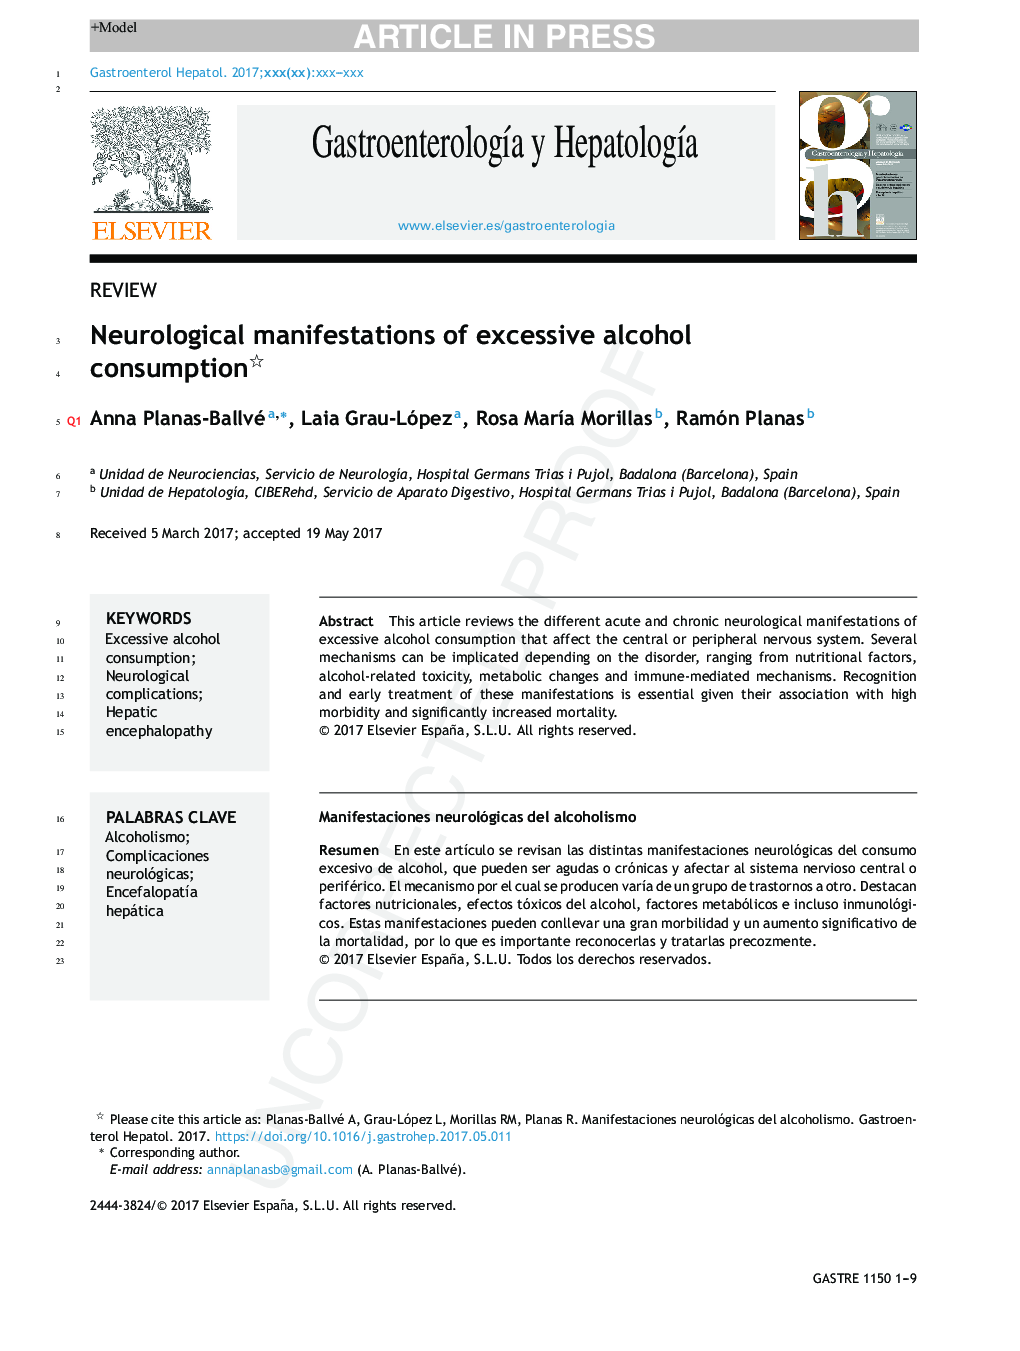 Neurological manifestations of excessive alcohol consumption